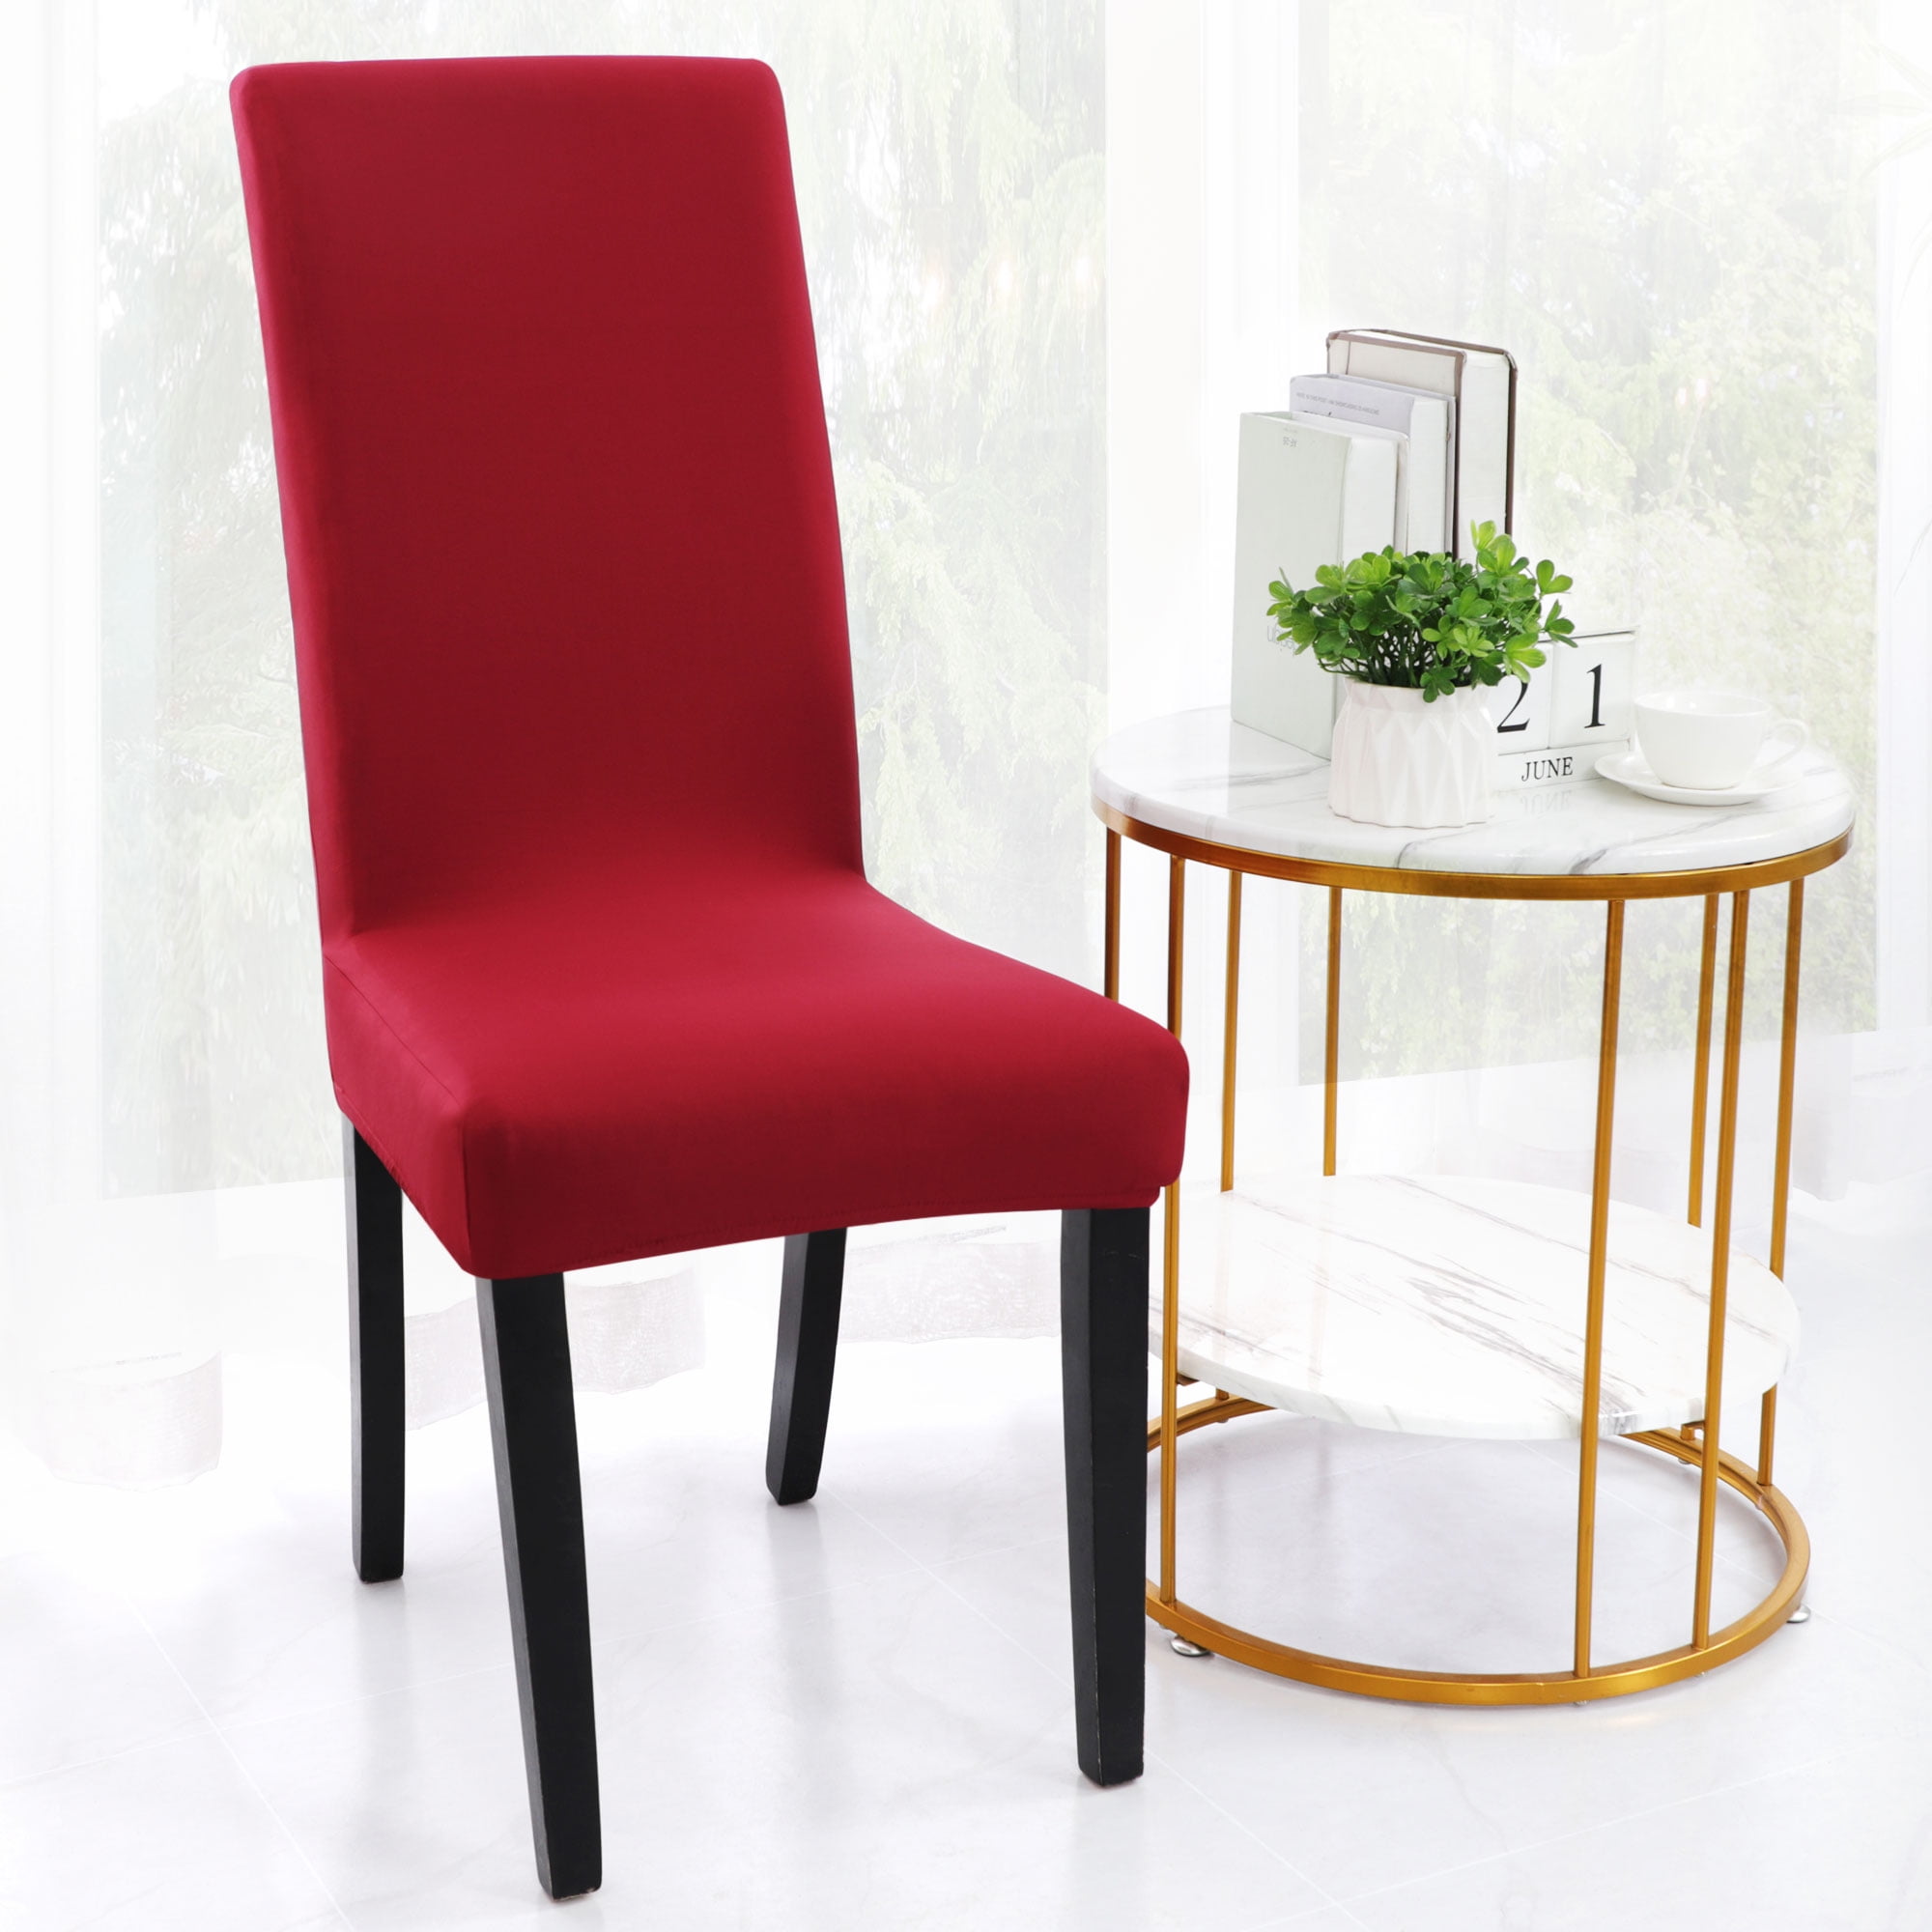 Details about   1/4/6PC Premium Spandex Stretch Chair Covers Stretch Dining Room Seat Slipcovers 